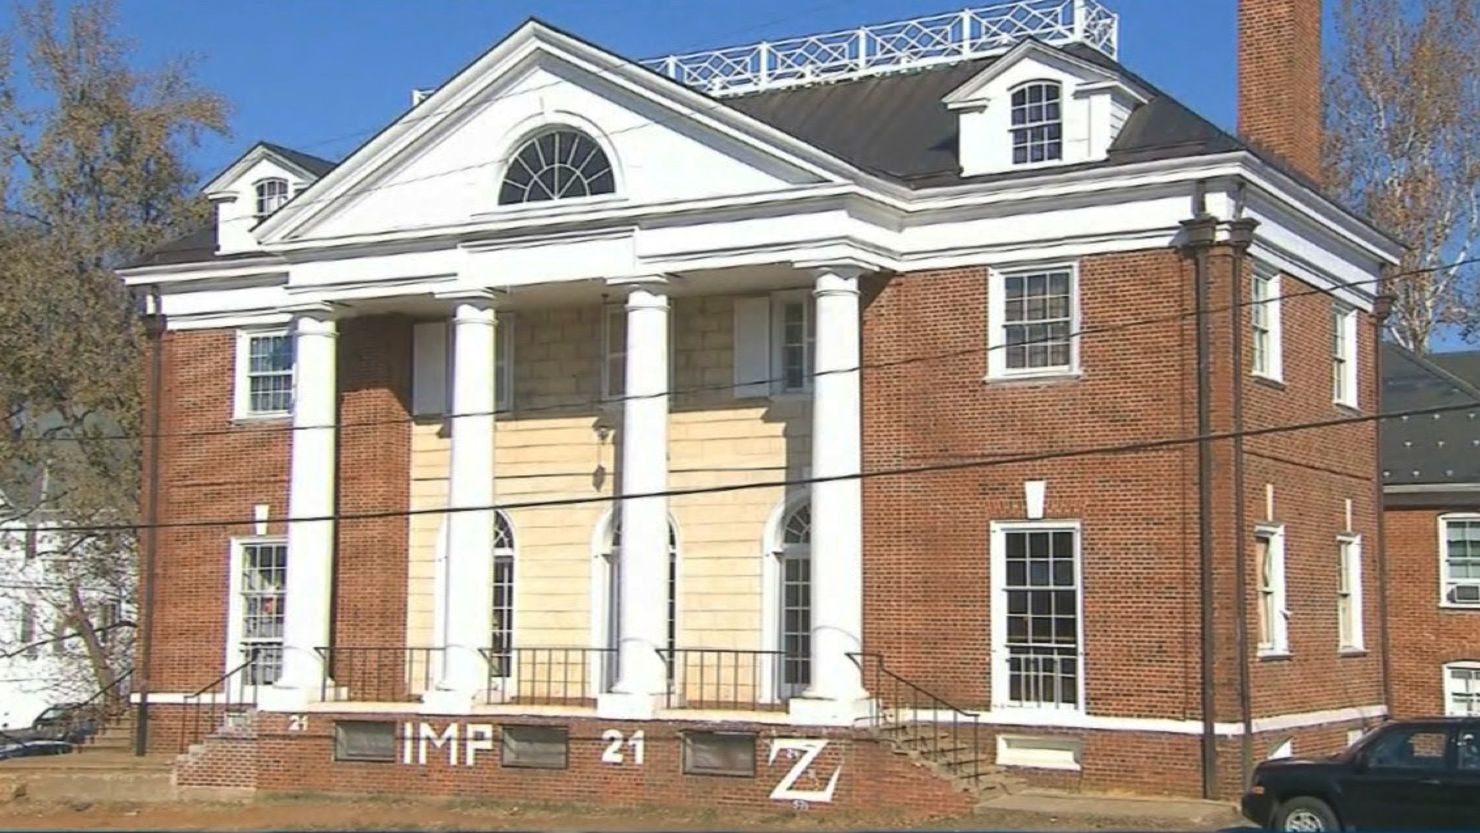 In the now-discredited Rolling Stone article, a woman claimed she was raped at the UVA Phi Kappa Psi fraternity house.